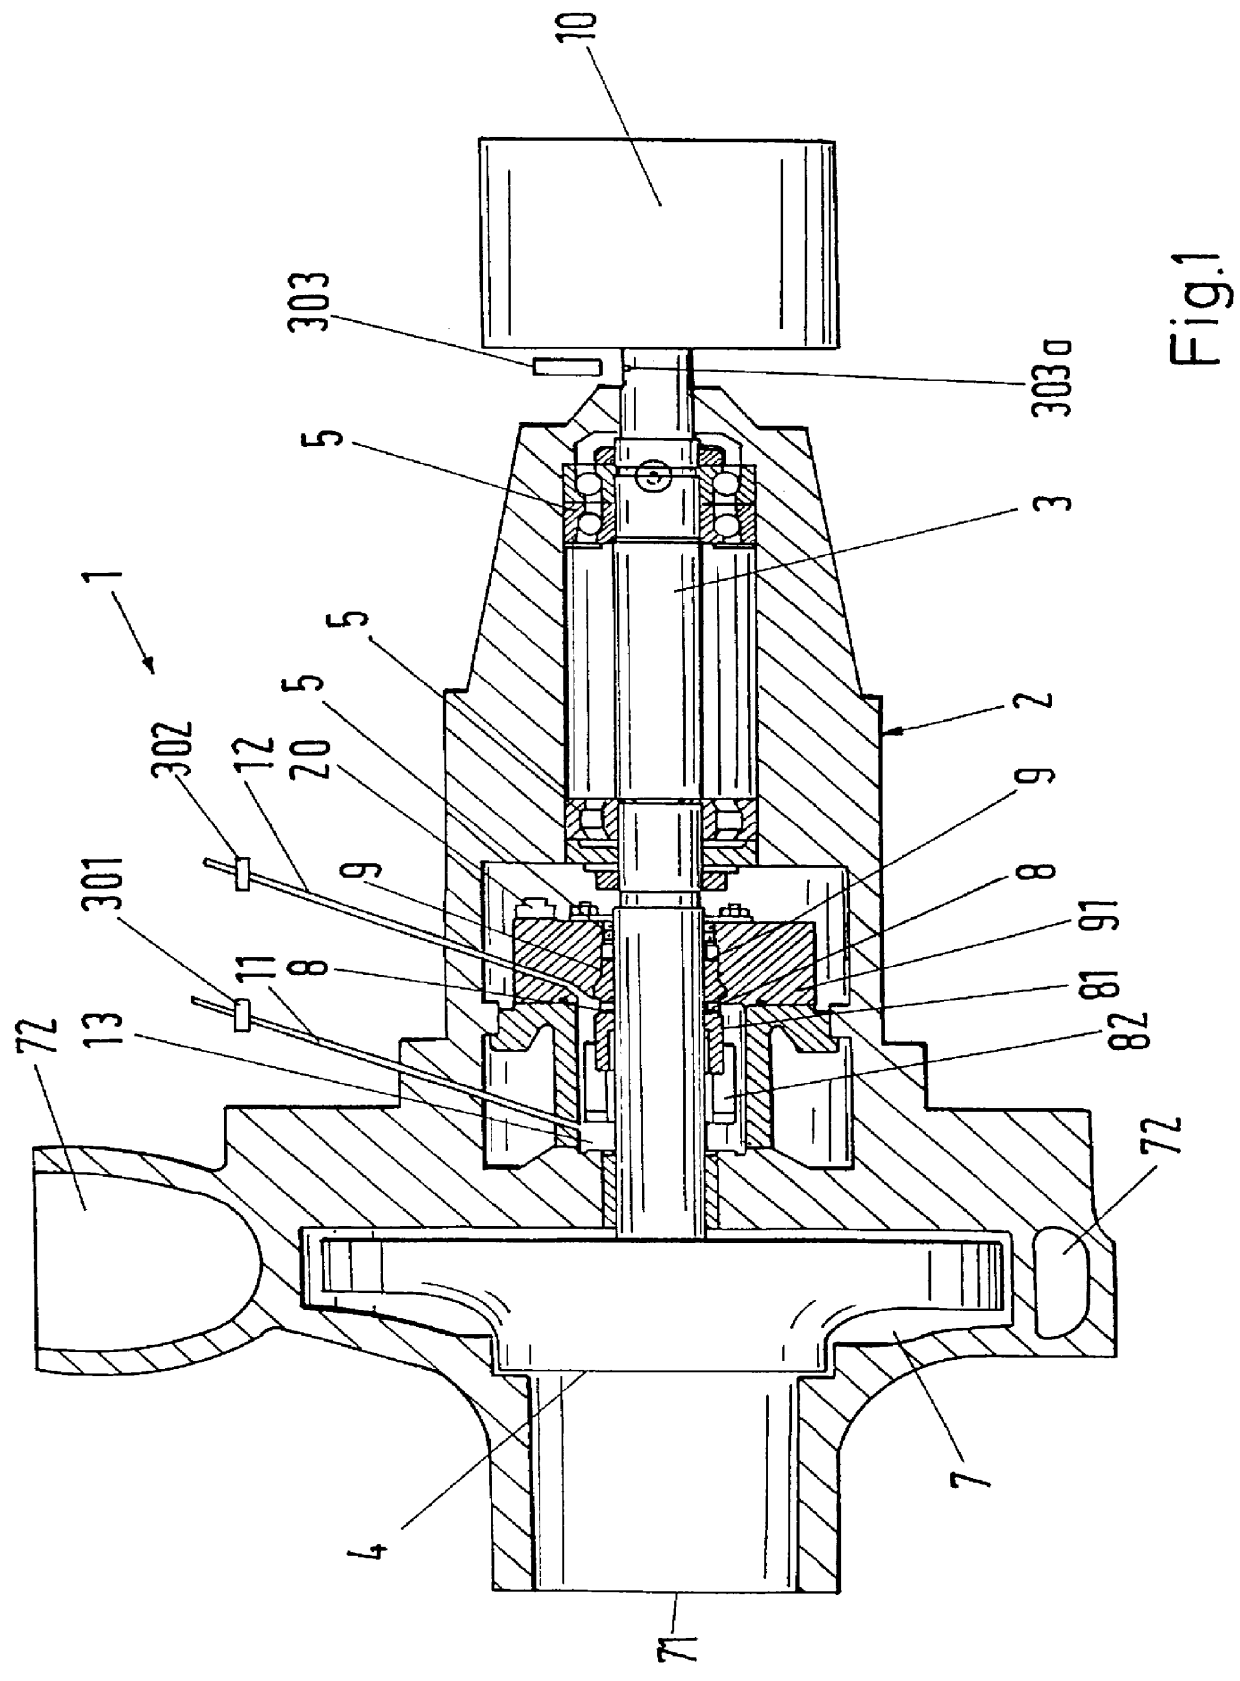 Method for monitoring the condition of a mechanical seal